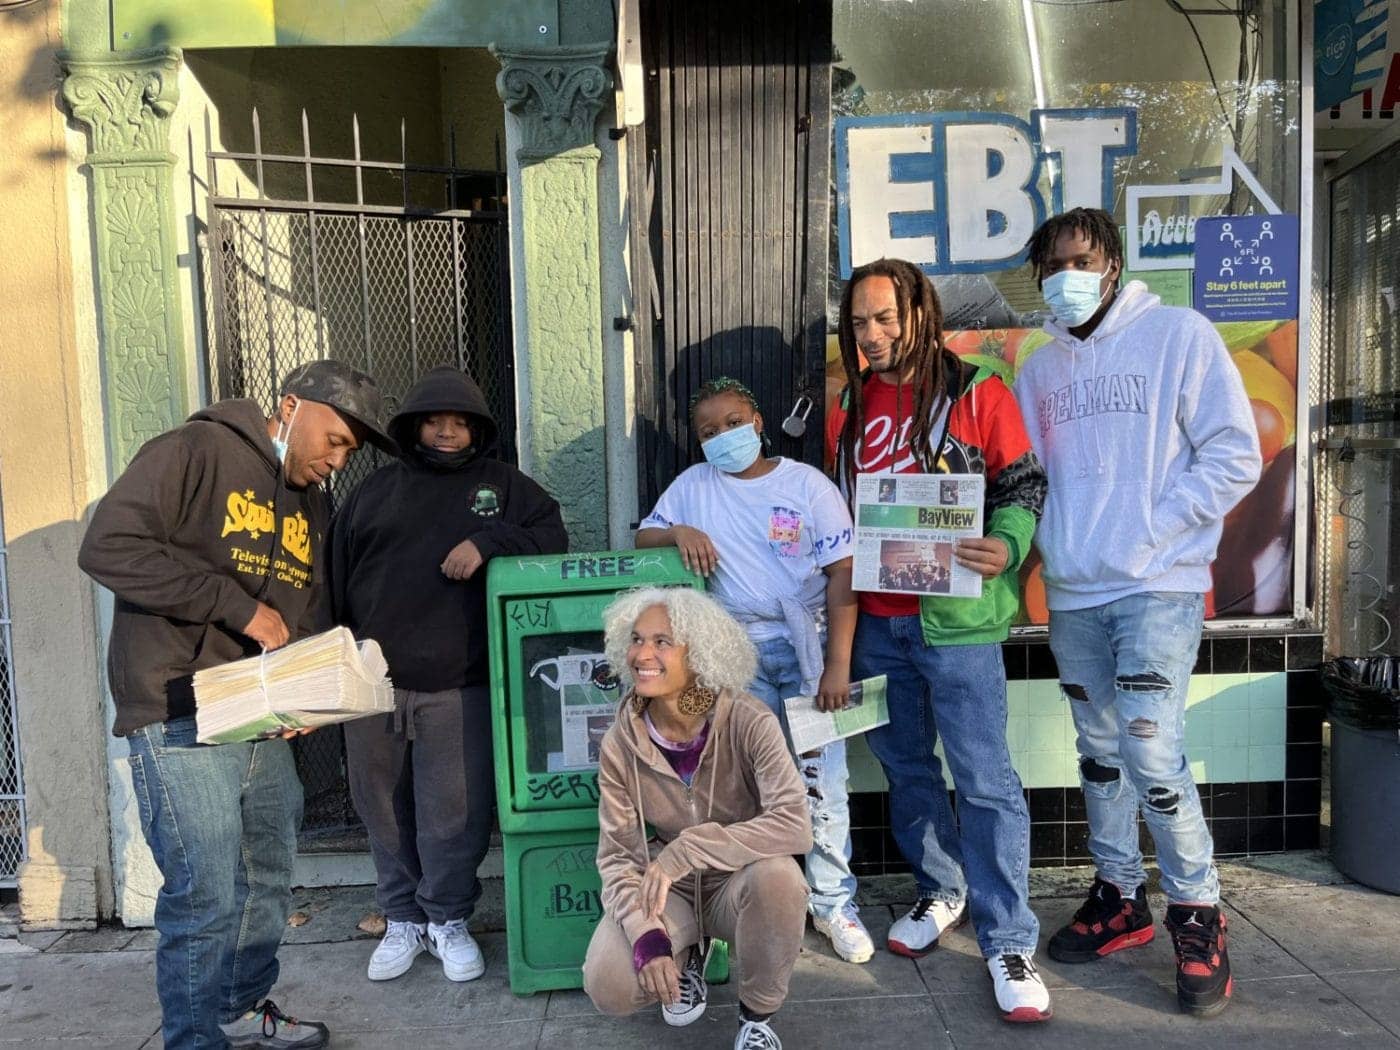 Weaponization-of-Media-class-at-the-Bay-View-by-Griffin-110222-1400x1050, <strong>In East Oakland, JR Valrey teaches youth to use media against the system</strong>, Culture Currents Local News & Views News & Views 